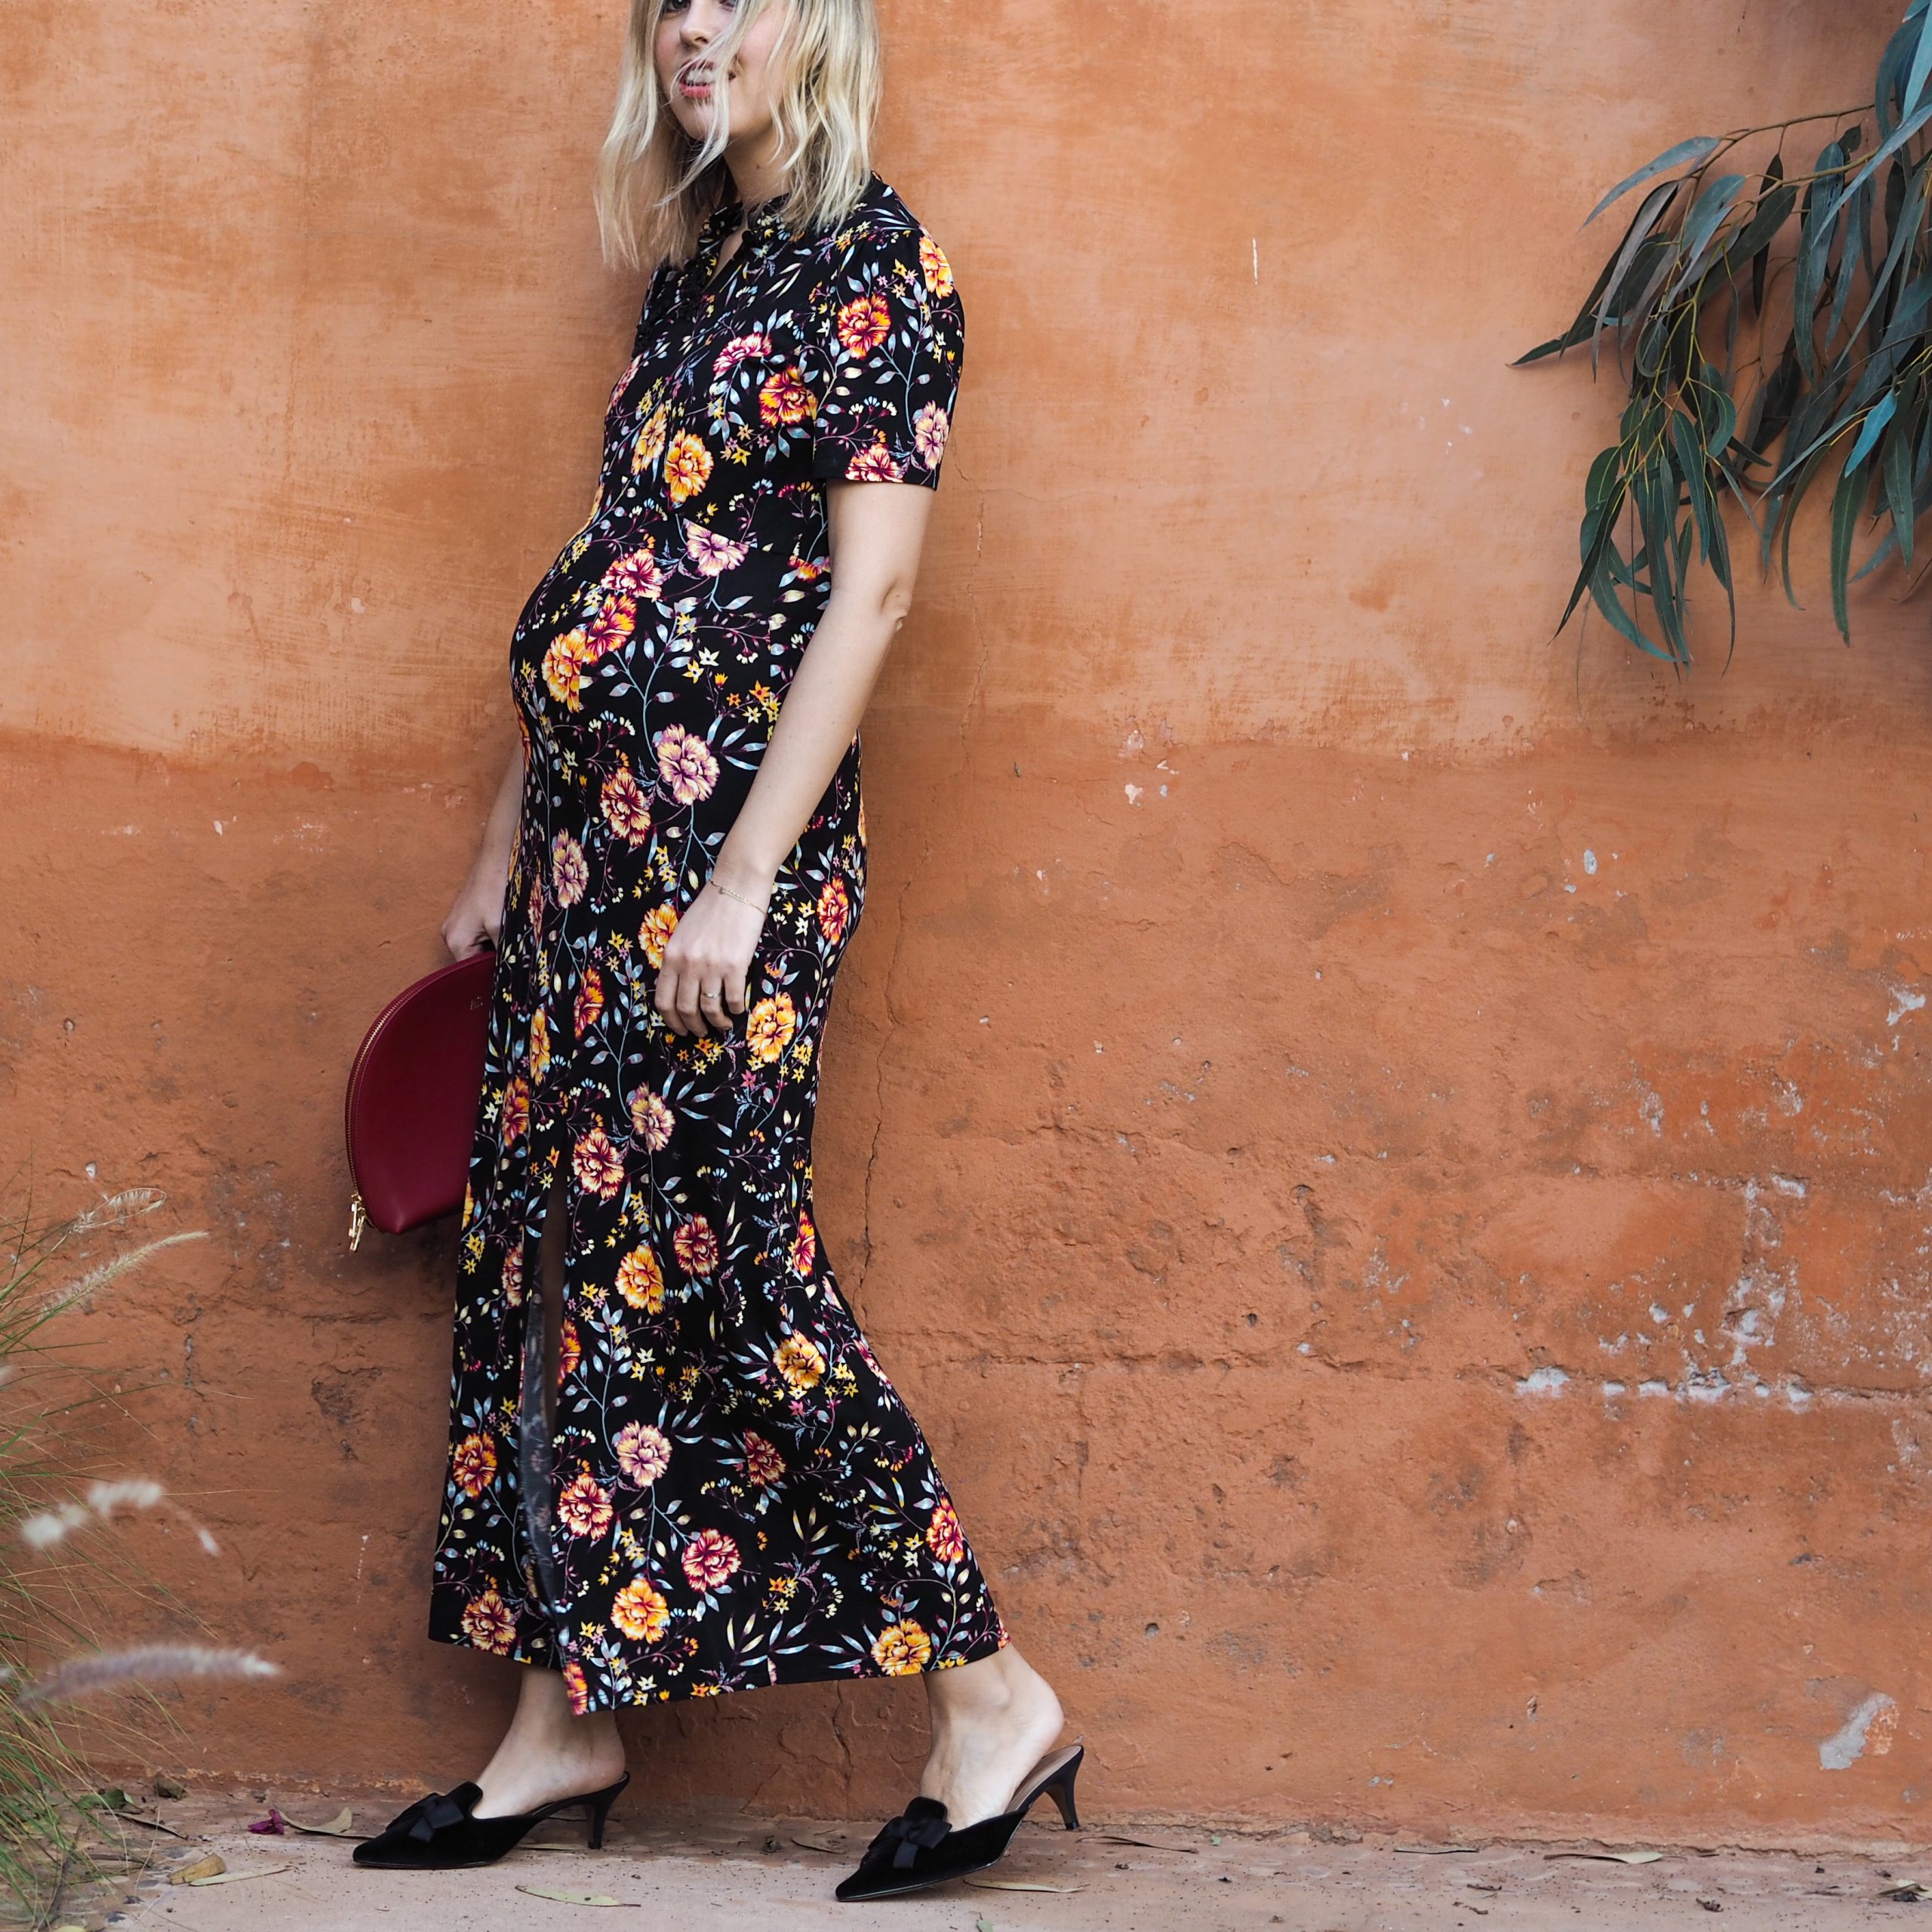 Sometimes the best maternity clothes aren’t maternity at all…